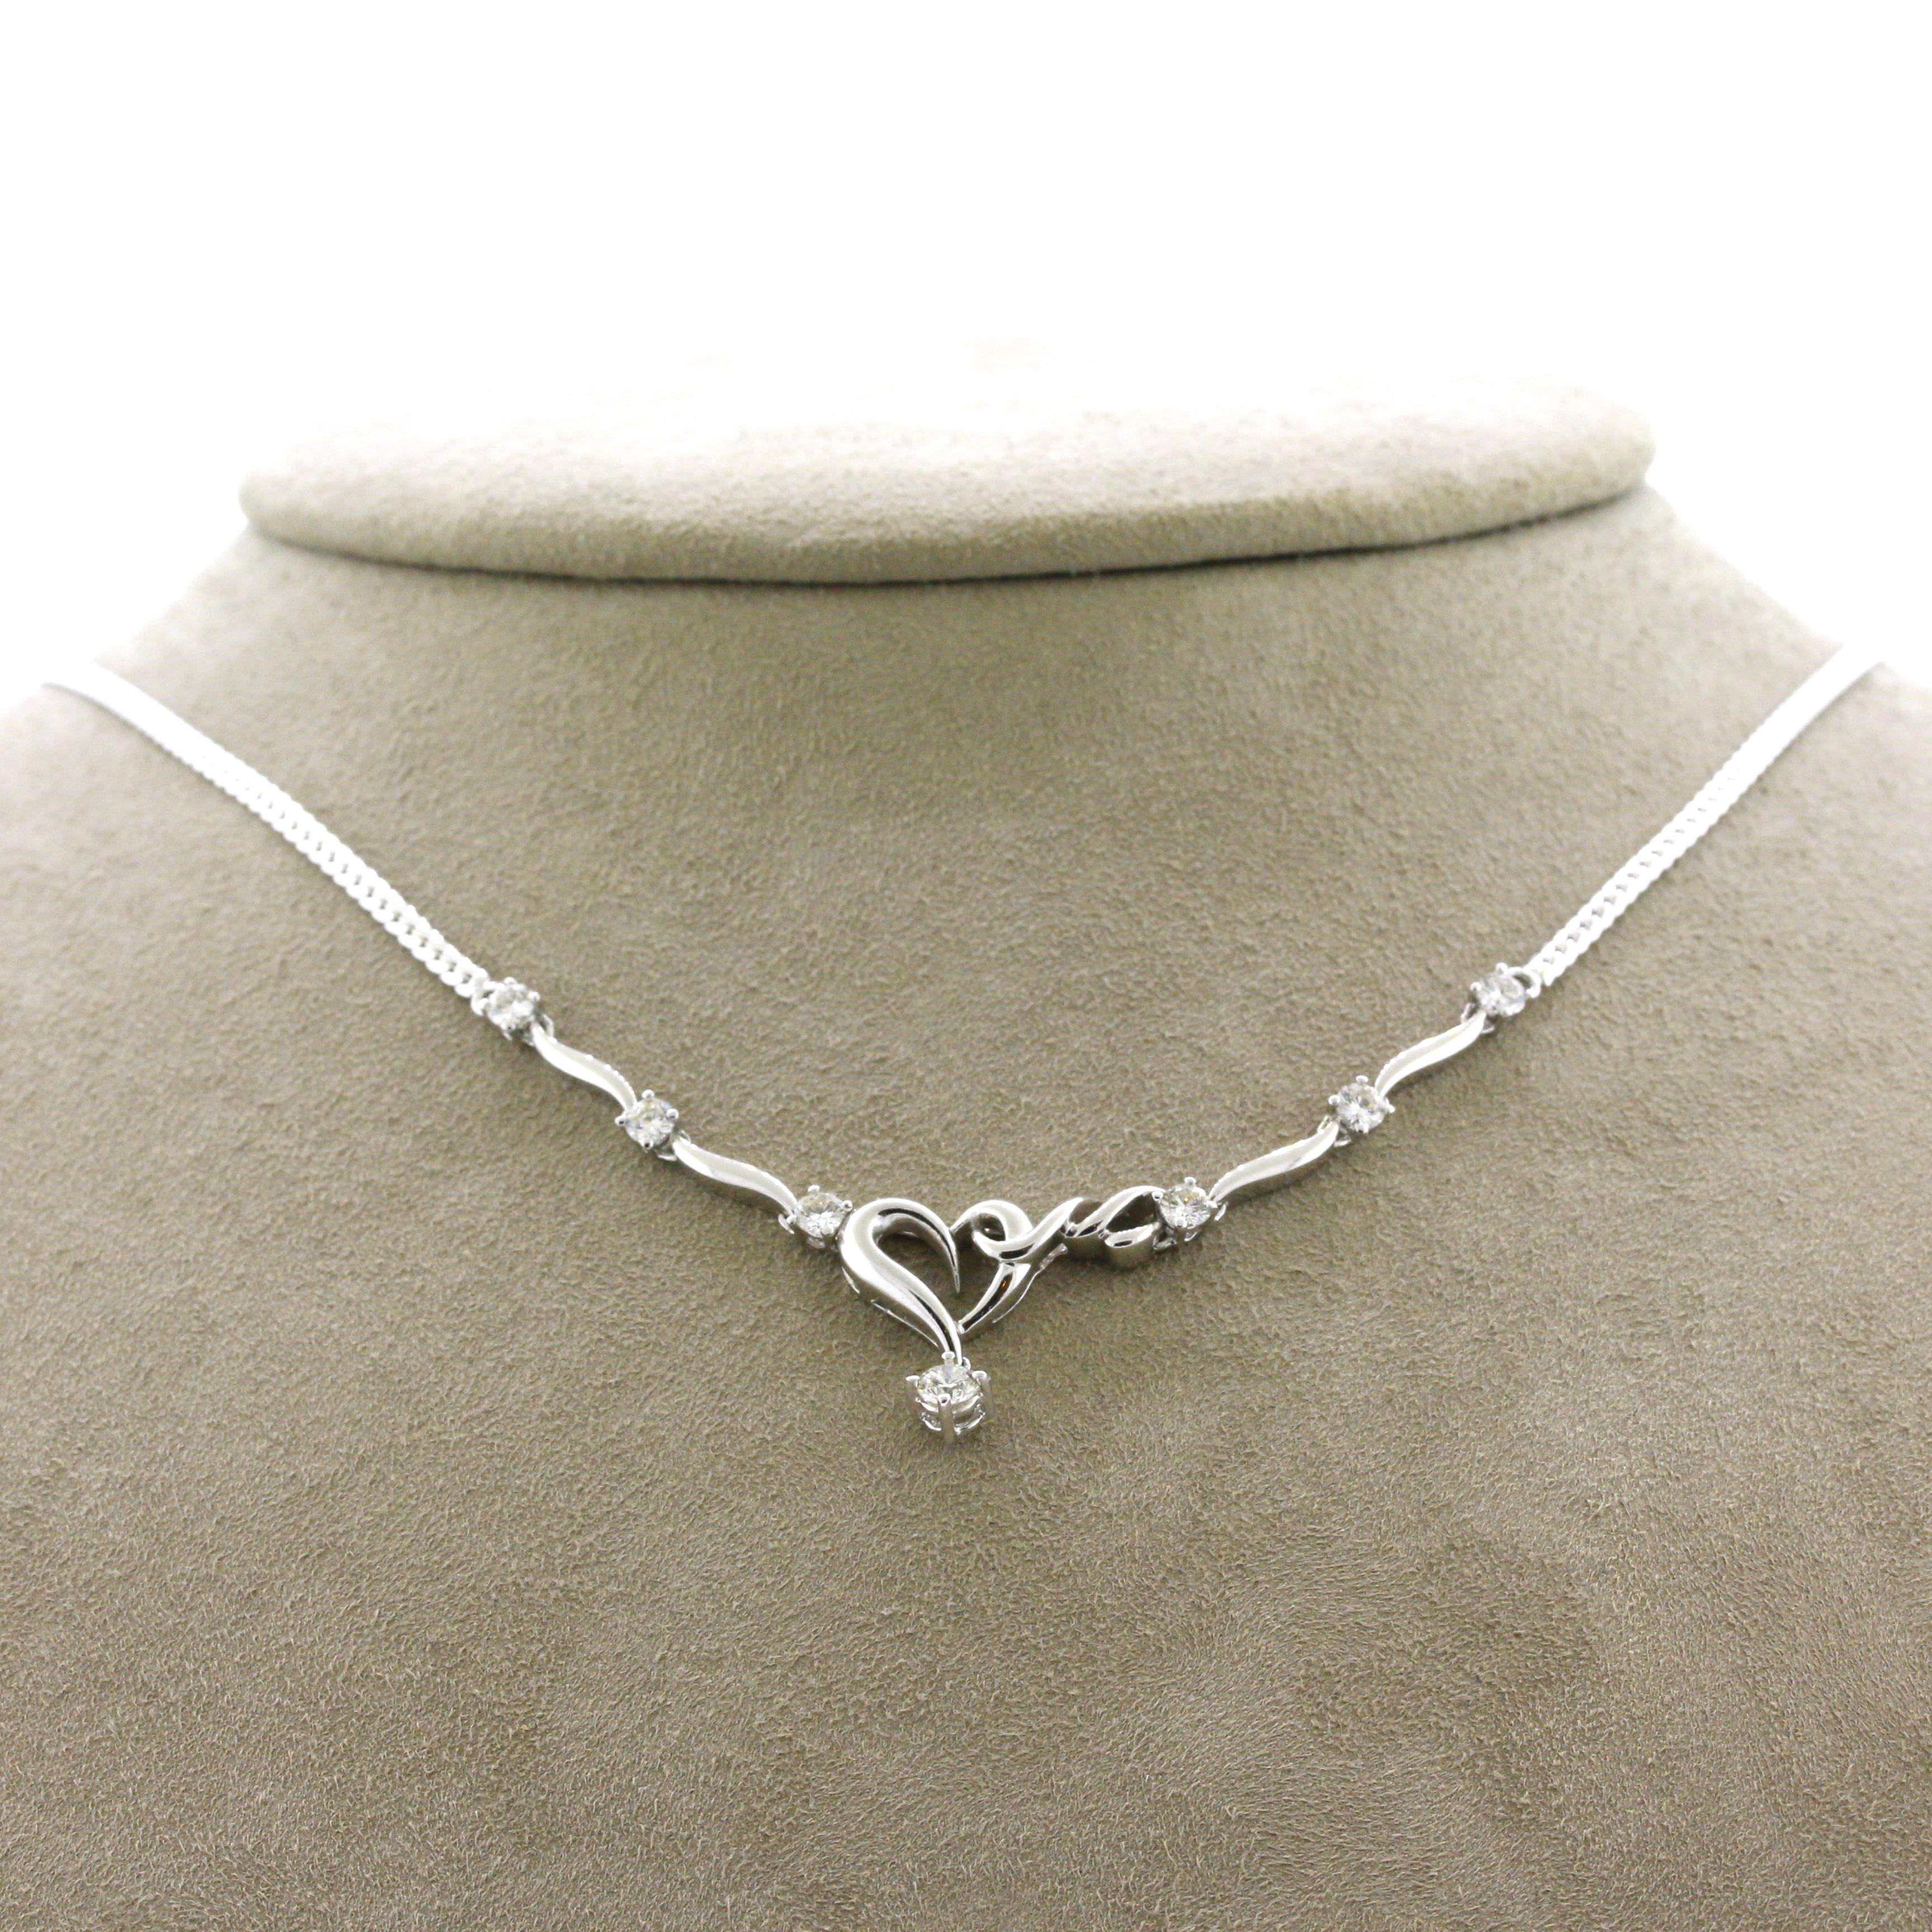 A simple and stylish necklace designed in a heart motif style! It features 7 round brilliant-cut diamonds weighing a total of 0.72 carats. The necklace is made in 18k white gold with a braided chain.

Length: 19 inches

Weight: 11.4 grams